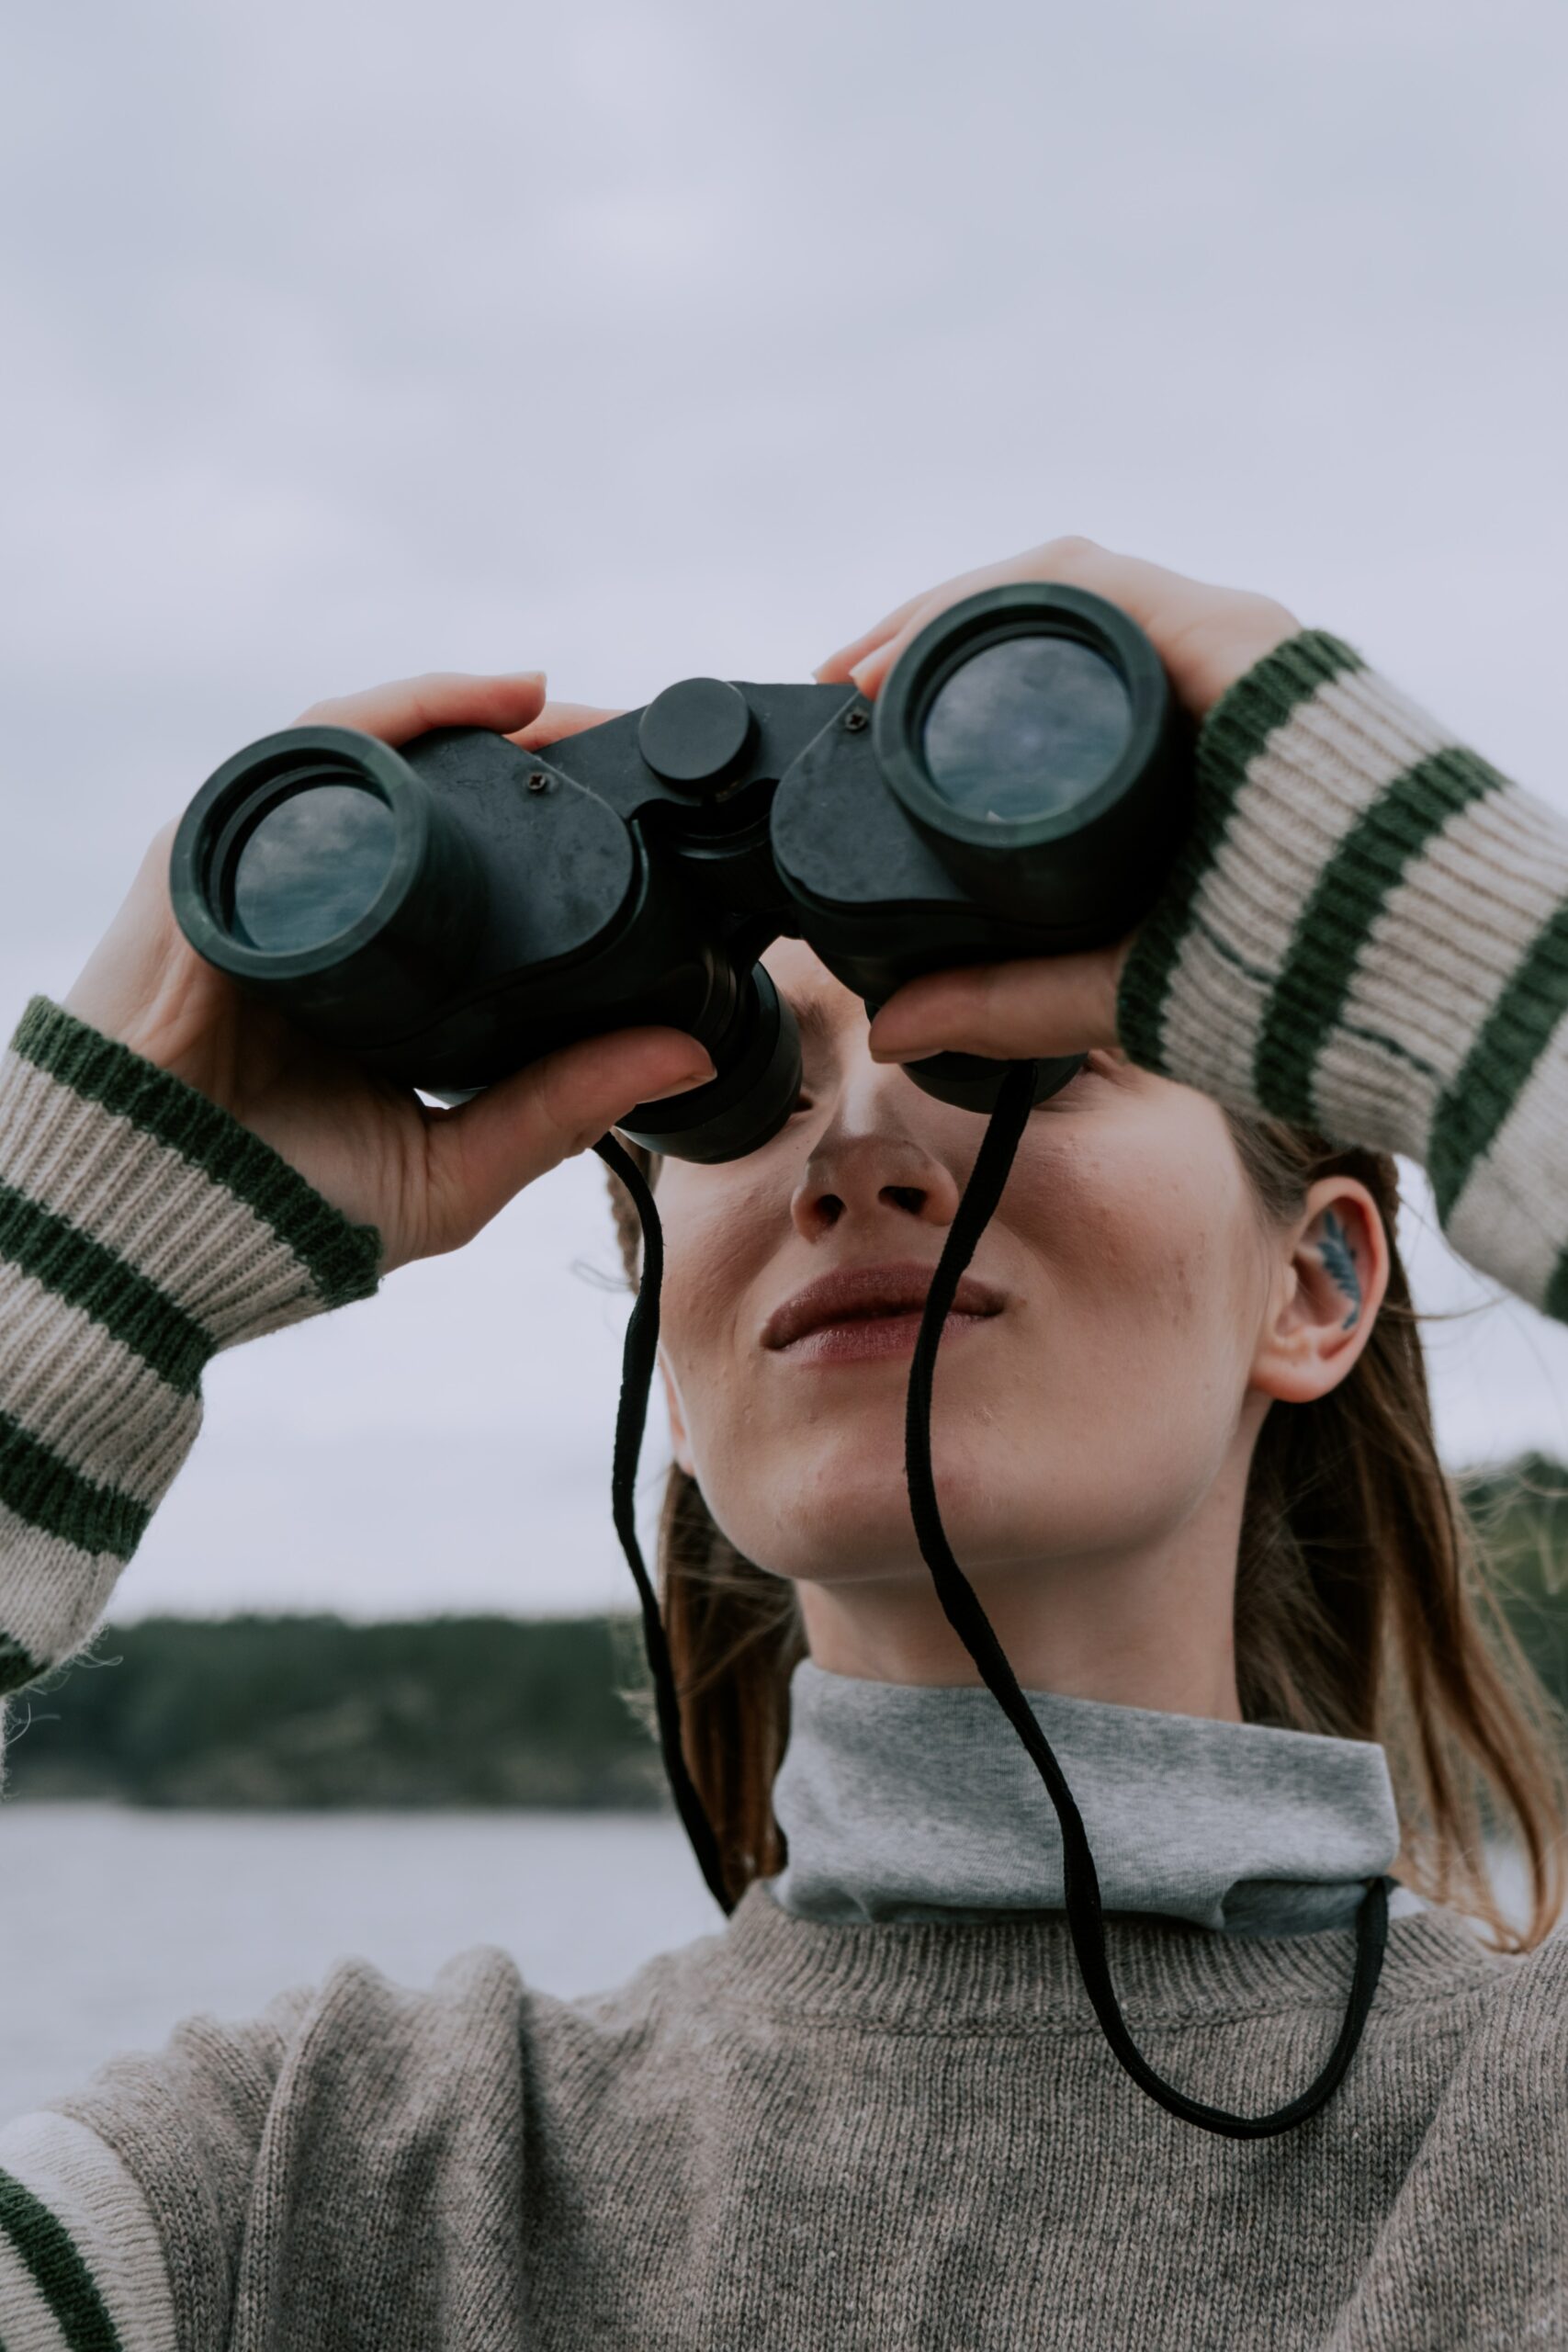 Woman looking through binoculars (Photo by cottonbro from Pexels)